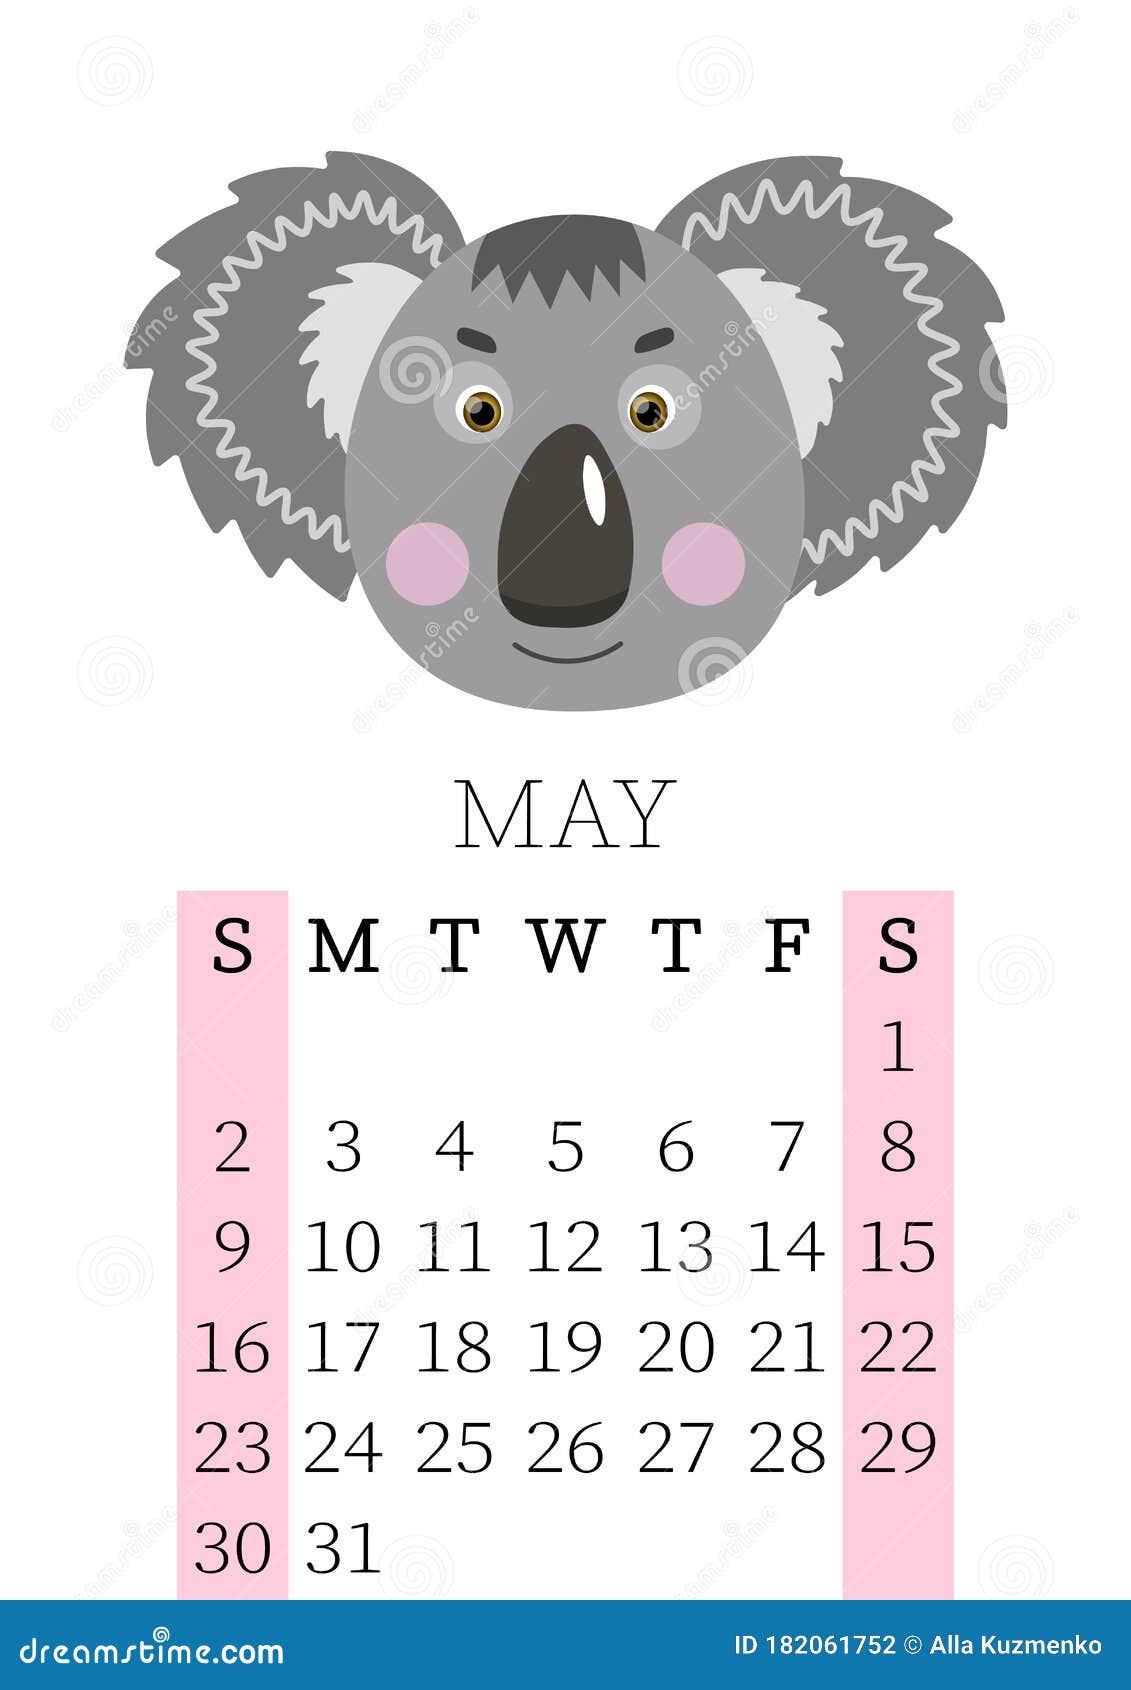 Calendar 2021 Monthly Calendar For May 2021 From Sunday To Saturday Yearly Planner Templates With Cute Hand Drawn Face Animals Stock Vector Illustration Of Cute Planner 182061752